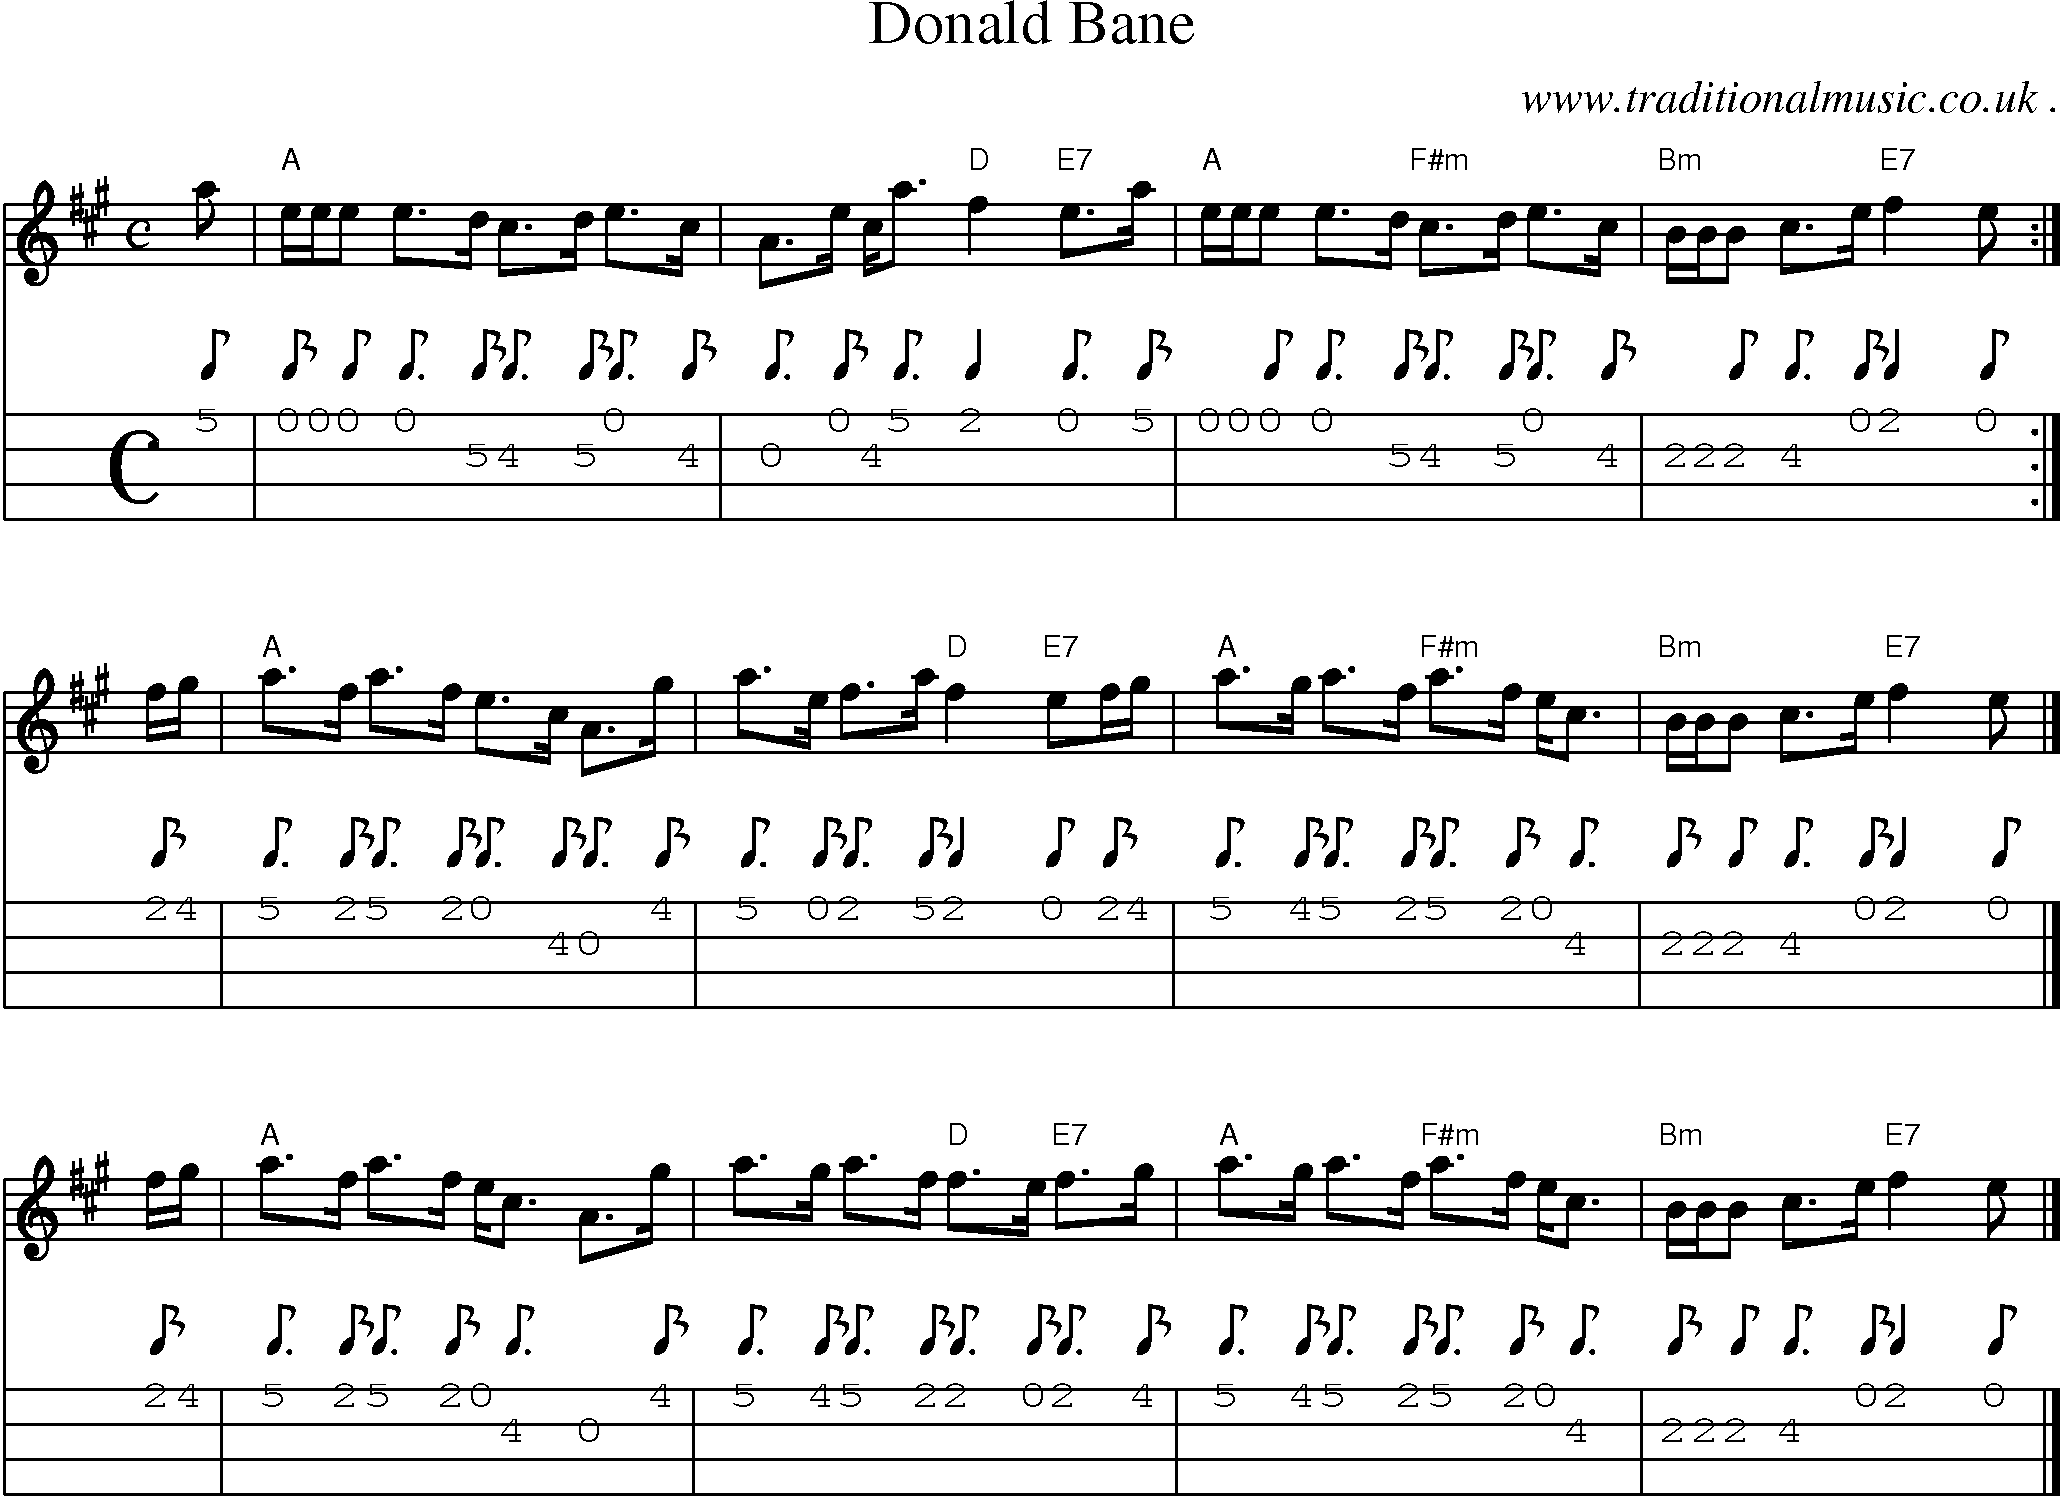 Sheet-music  score, Chords and Mandolin Tabs for Donald Bane